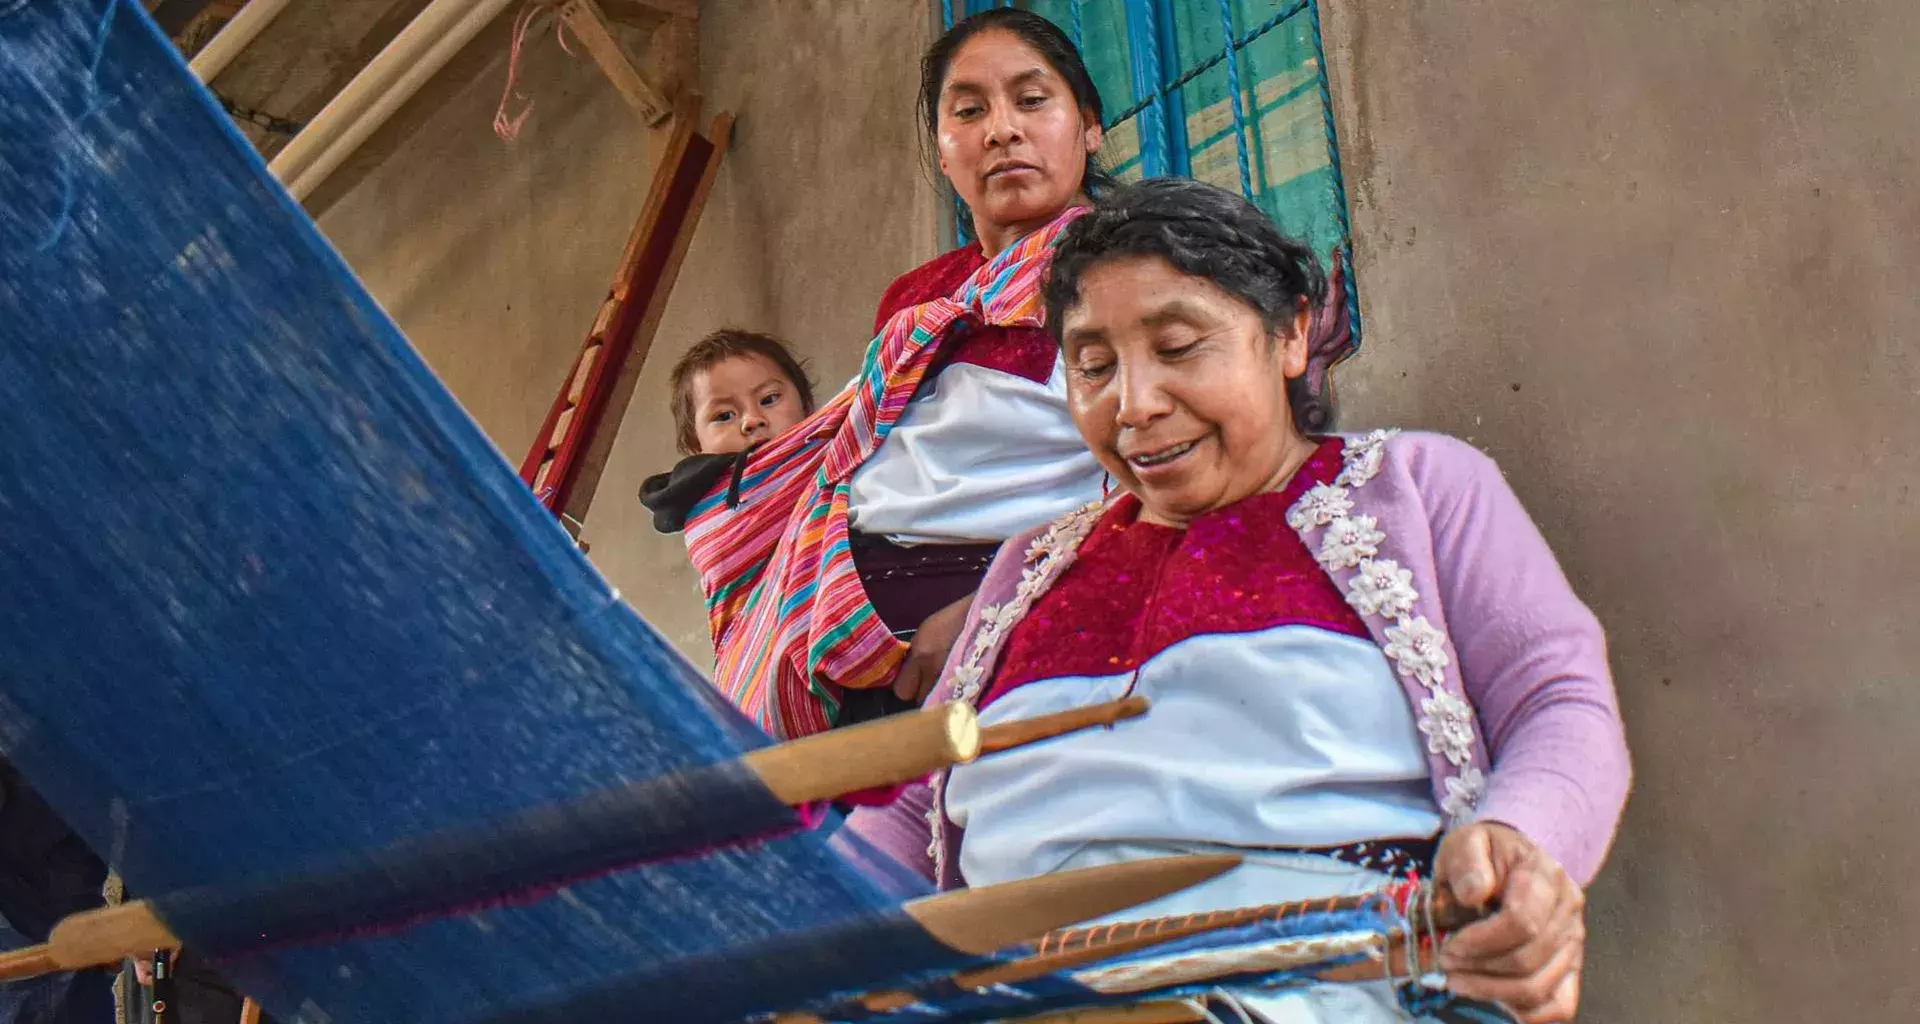 Family of weavers from Chiapas in the Mayan waist loom process